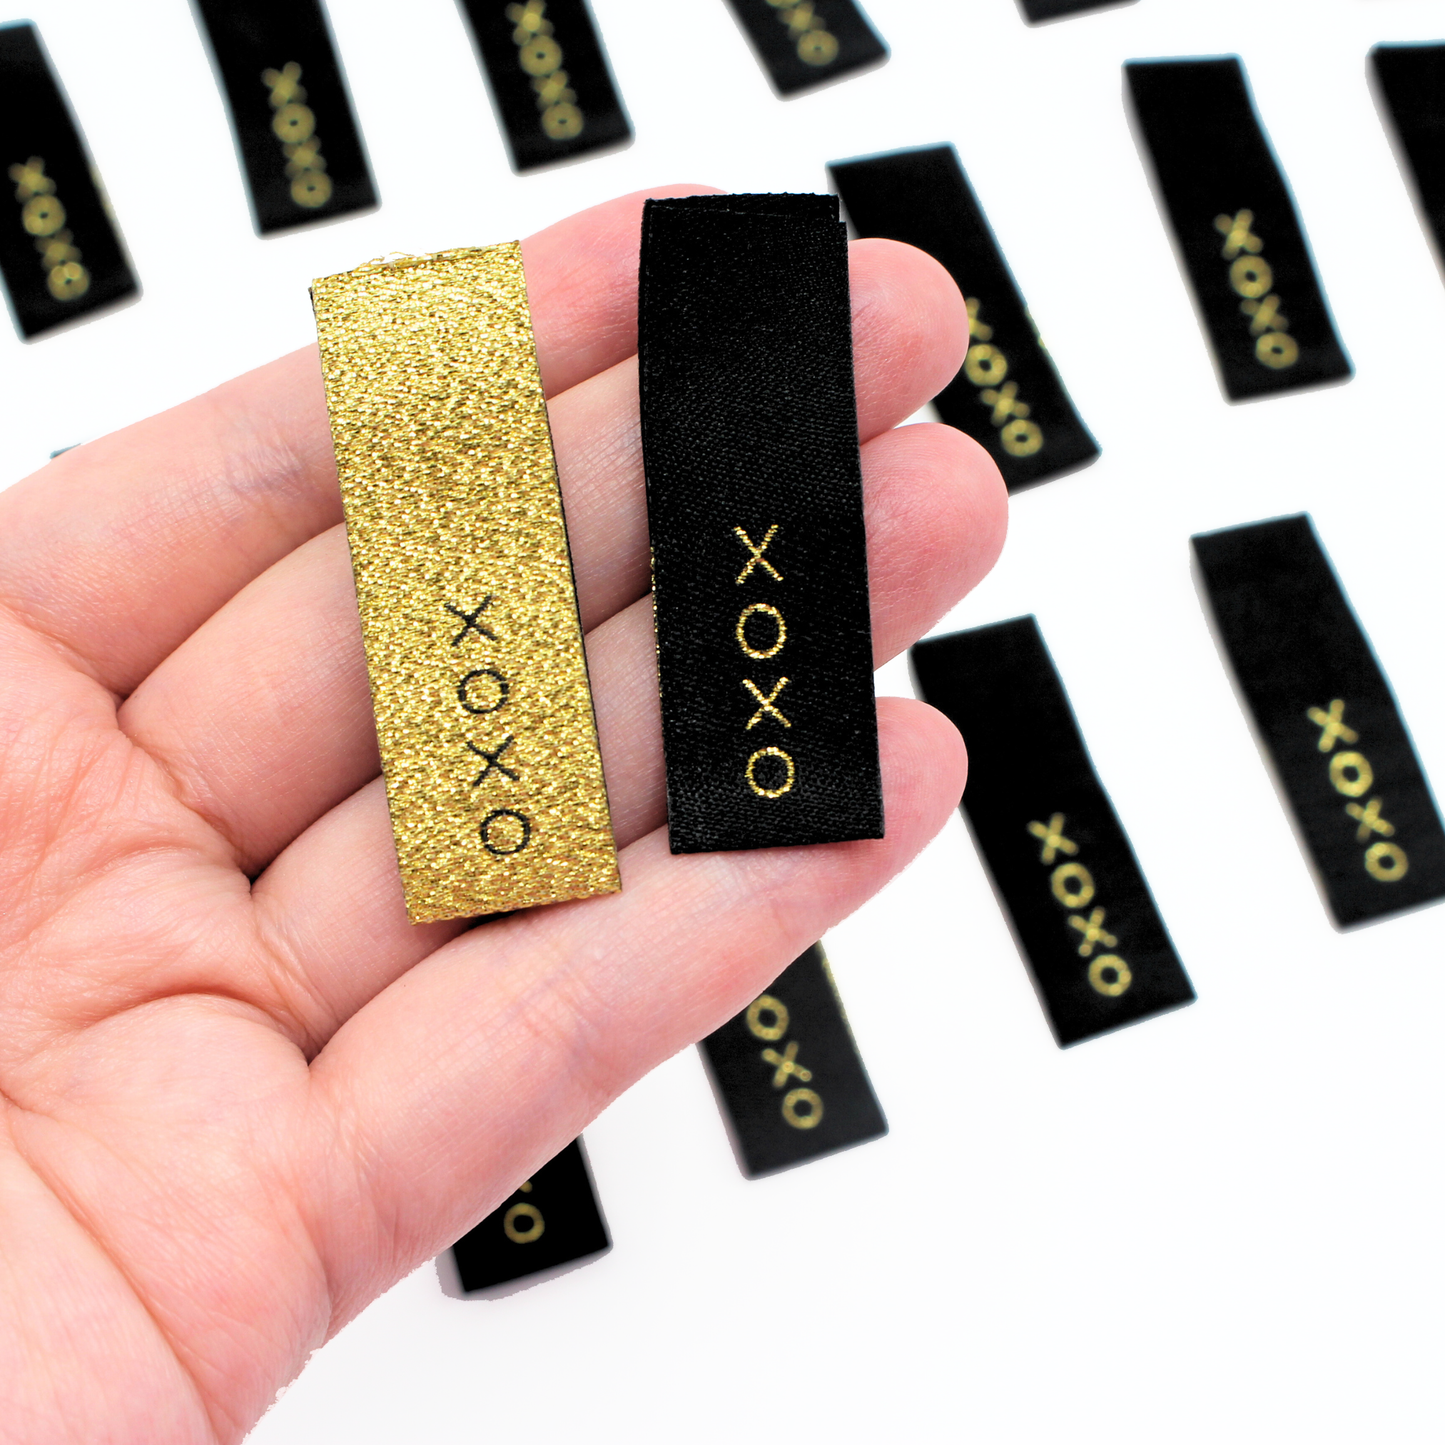 XOXO Metallic Black & Gold Multipack | Woven Sew In Labels